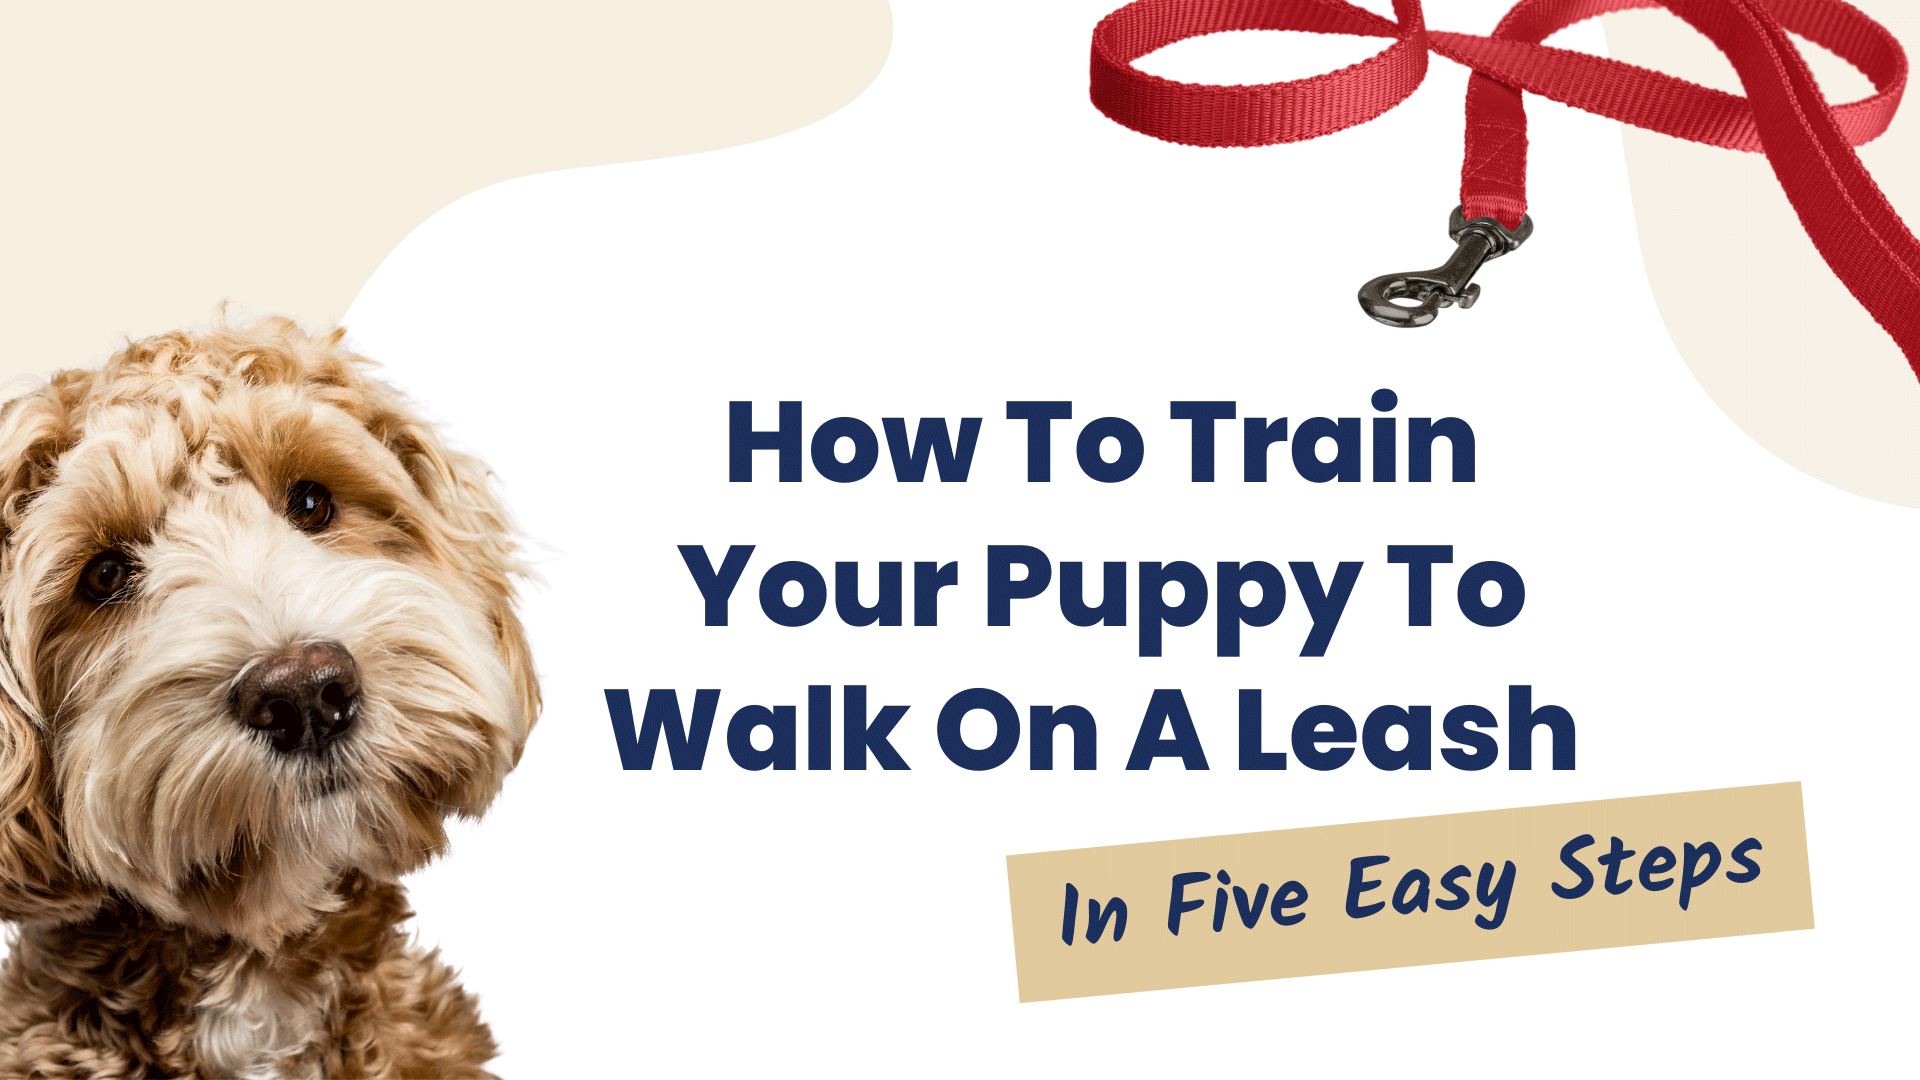 How To Train A Puppy To Walk On A Leash